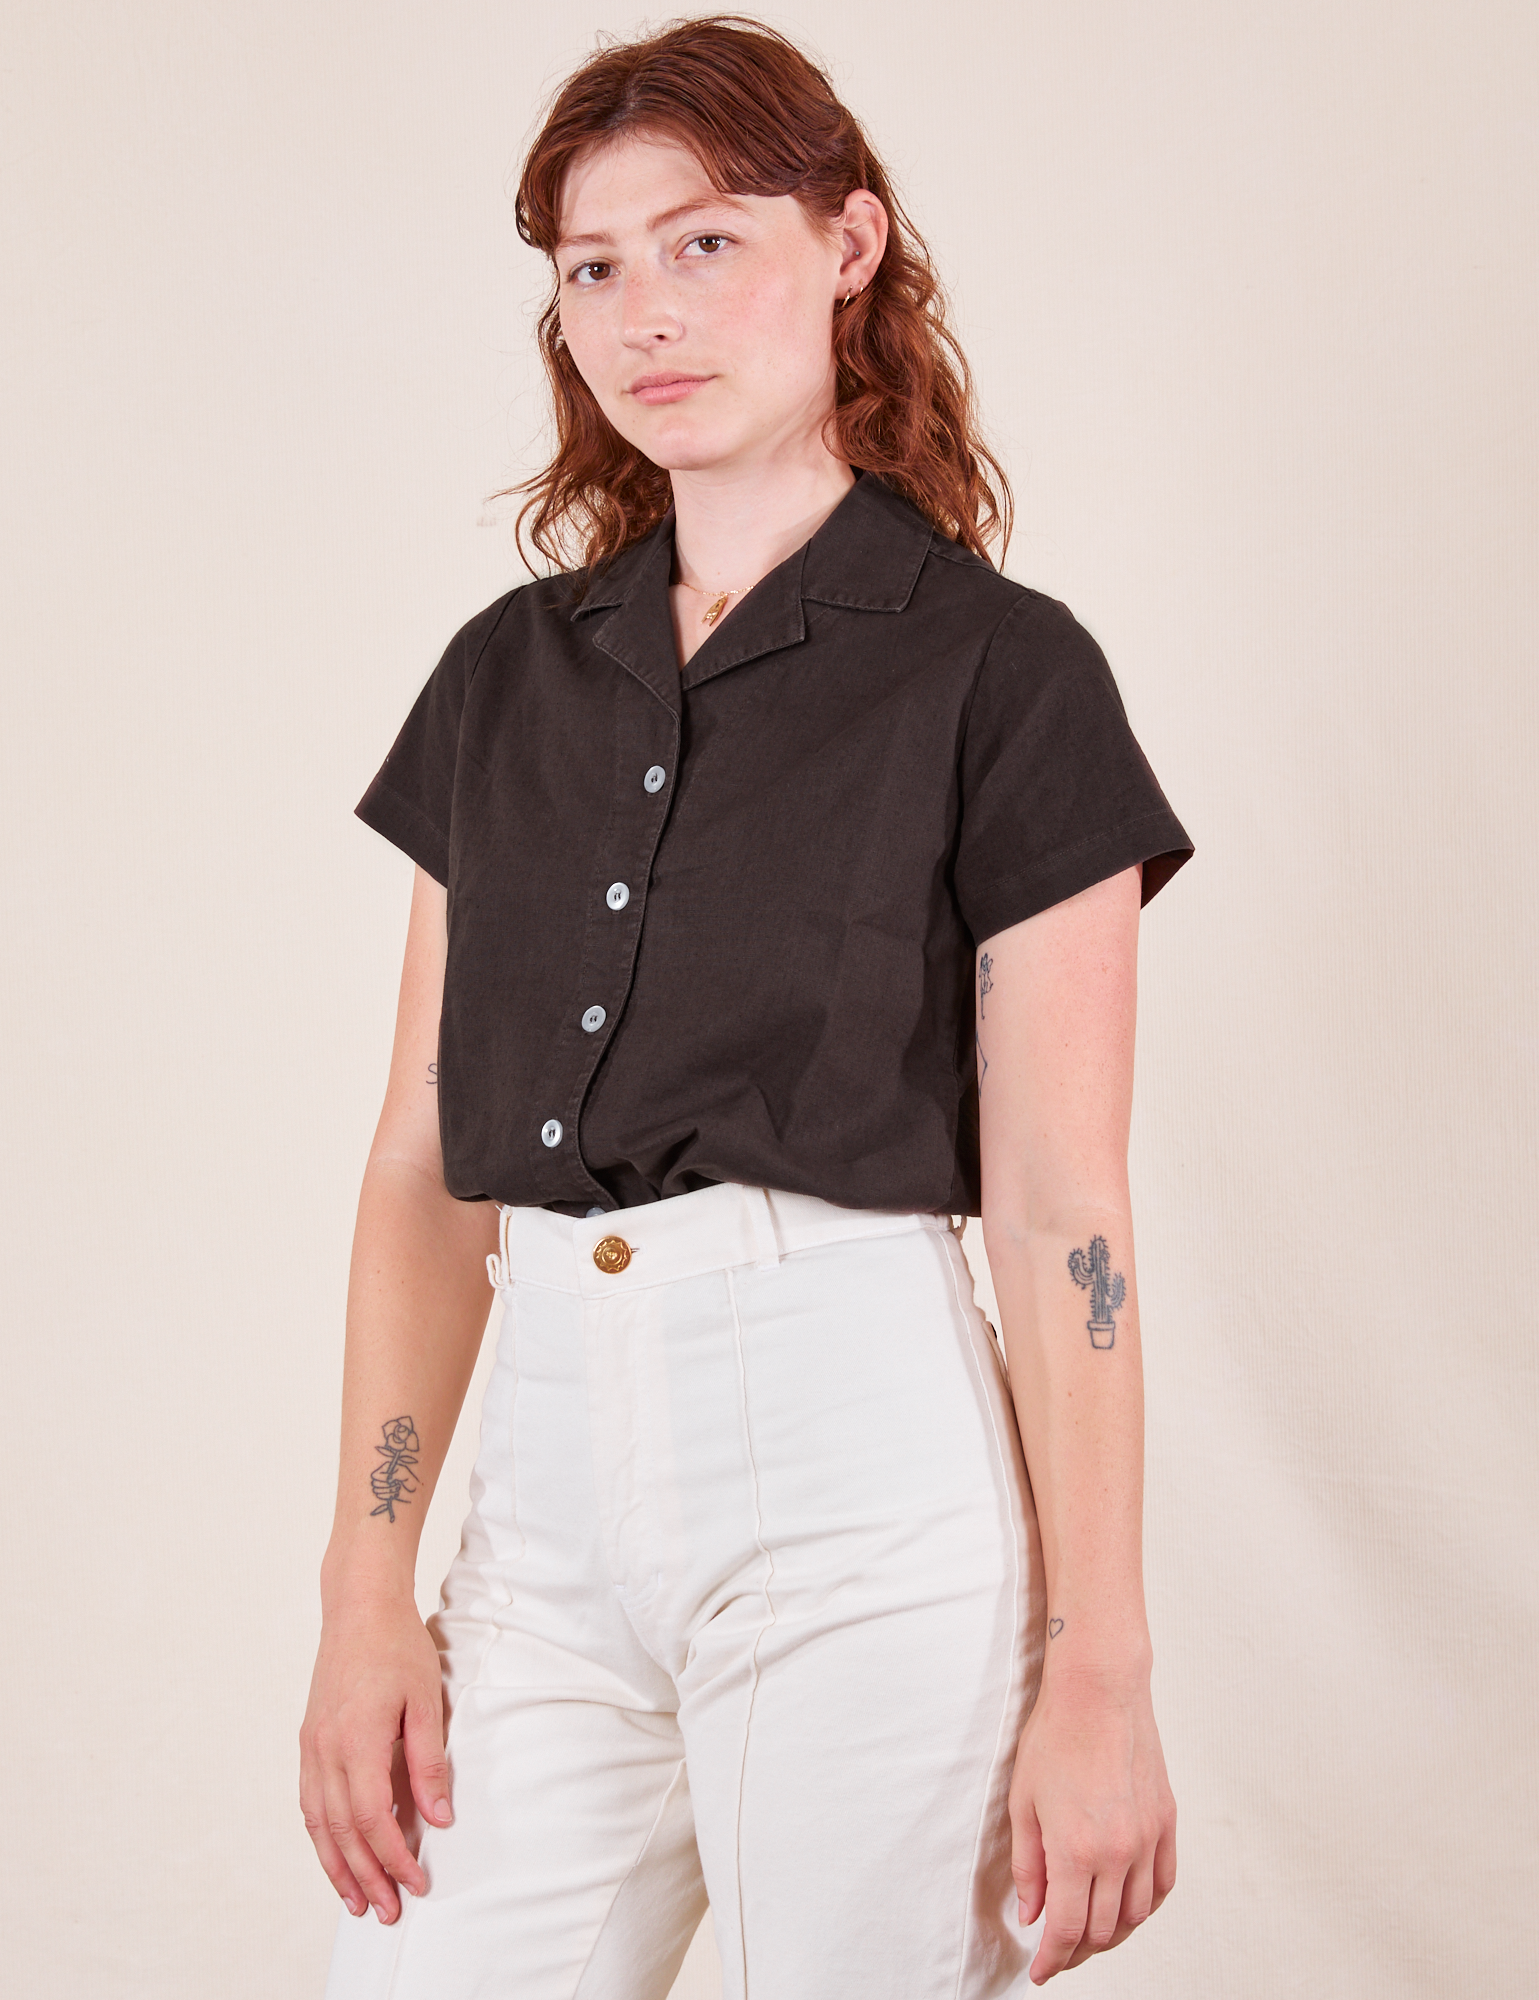 Alex is wearing P Pantry Button-Up in Espresso Brown tucked into vintage tee off-white Western Pants